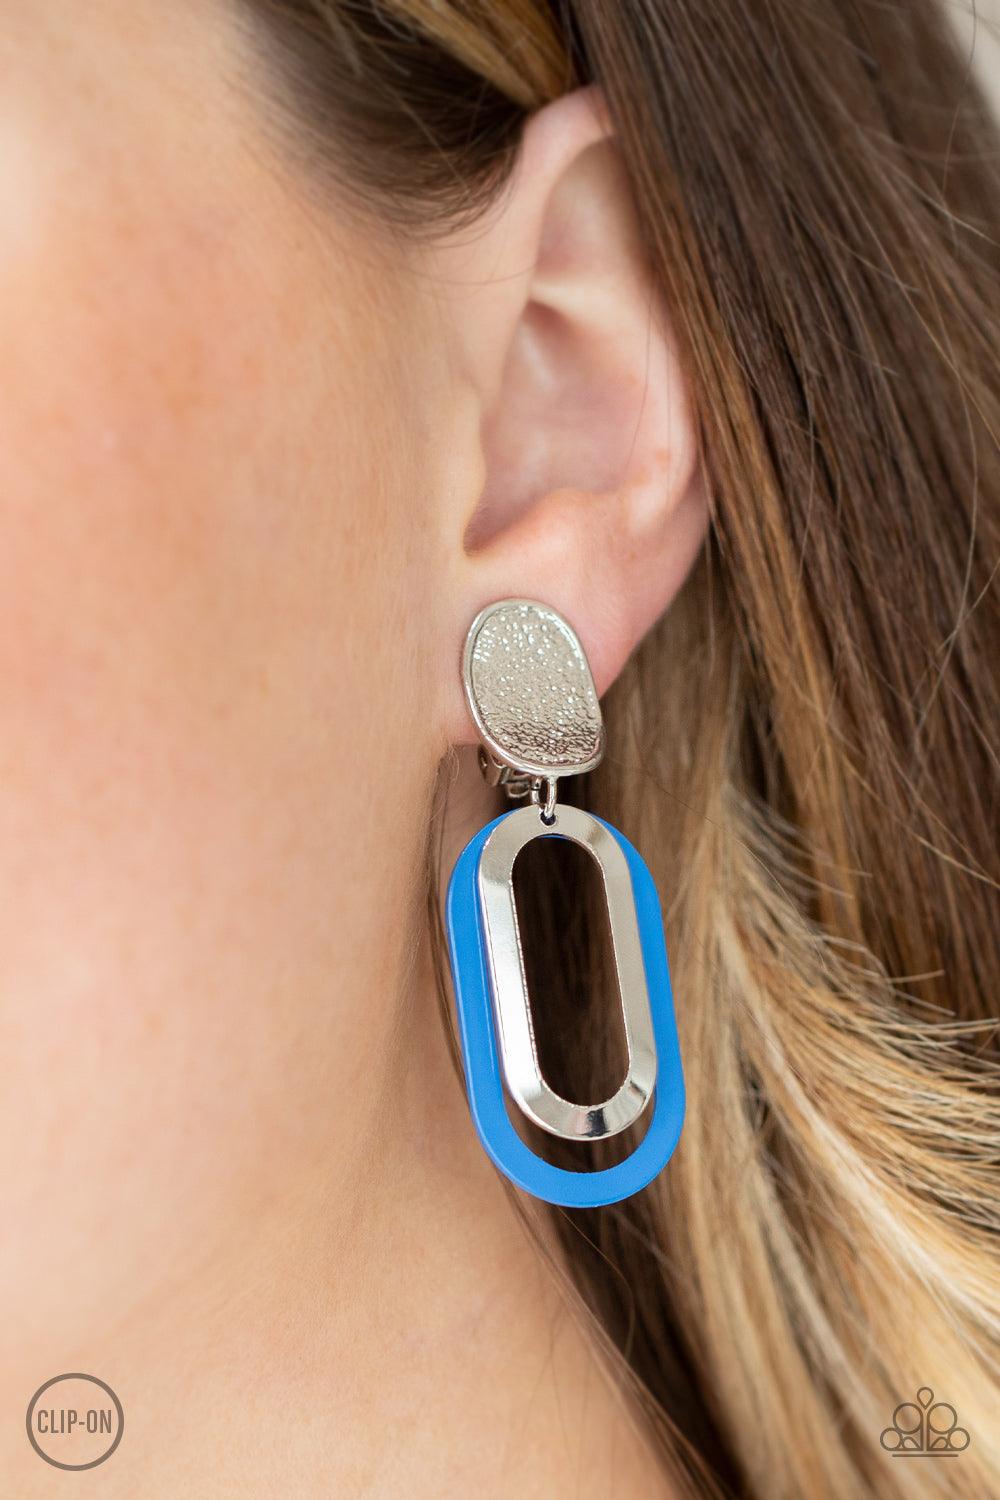 Paparazzi Accessories Melrose Mystery - Blue *Clip-On Shiny silver and French Blue oblong hoops dangle from a shimmery textured silver oval disc for an upscale finale. Earring attaches to a standard clip-on fitting. Sold as one pair of clip-on earrings. J